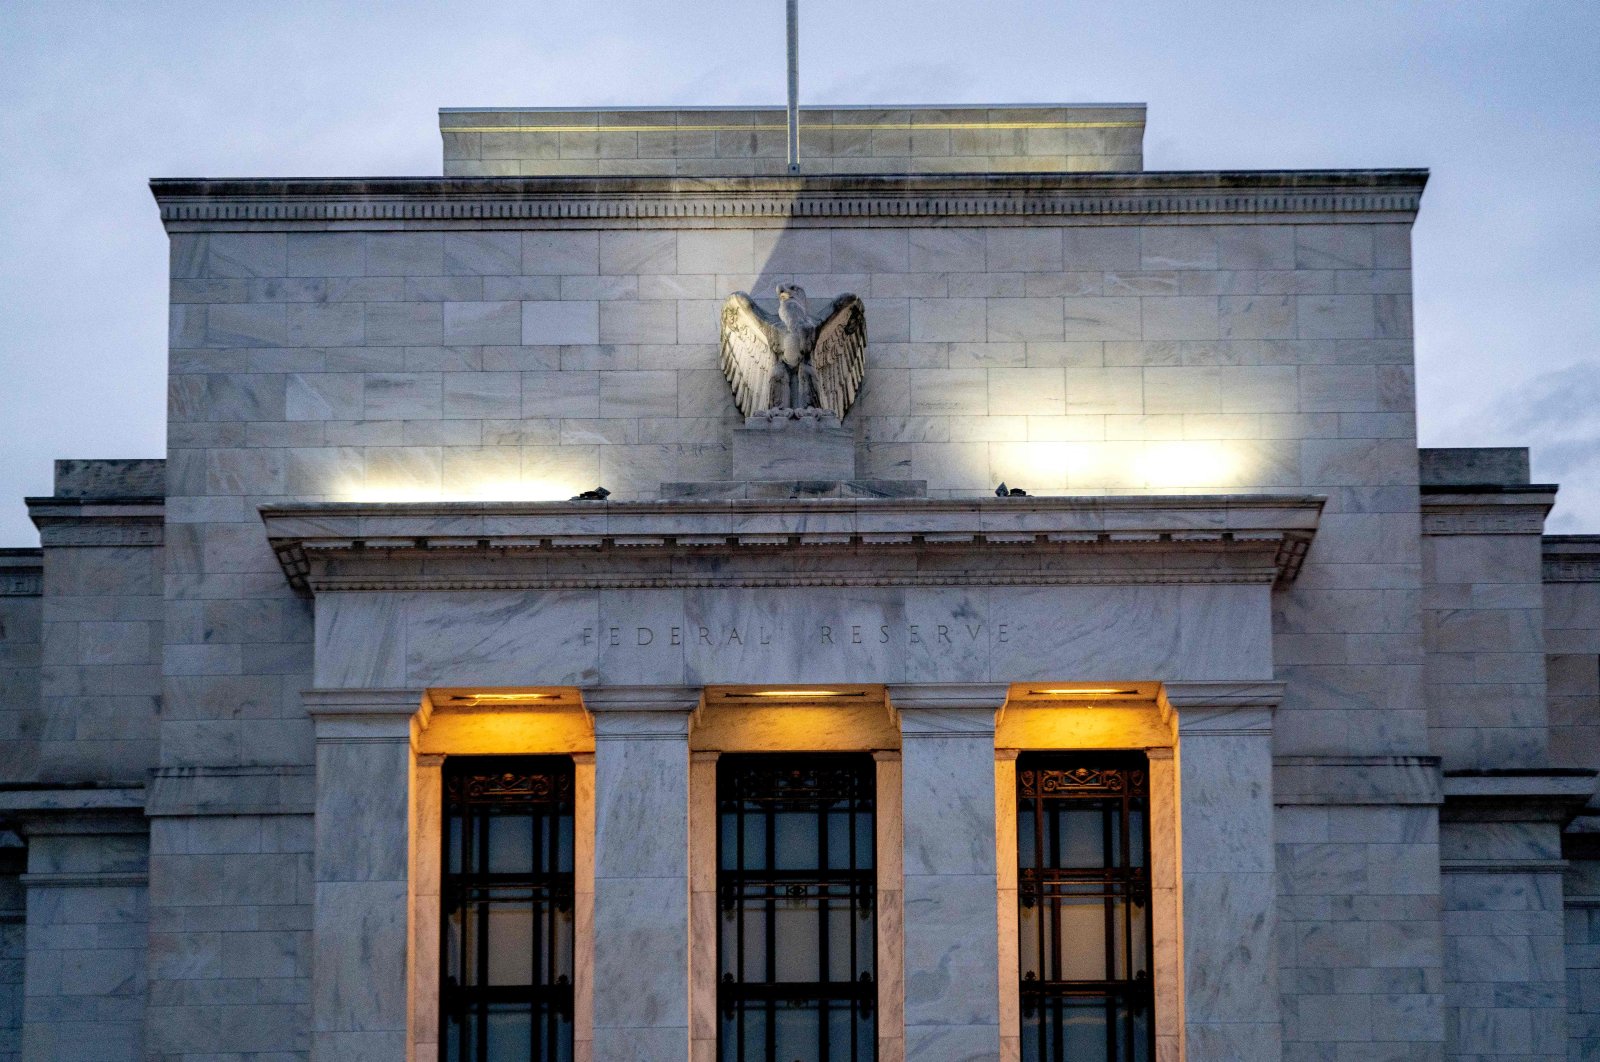 The Marriner S. Eccles Federal Reserve building in Washington, D.C., U.S., Jan. 25, 2022. (AFP Photo)